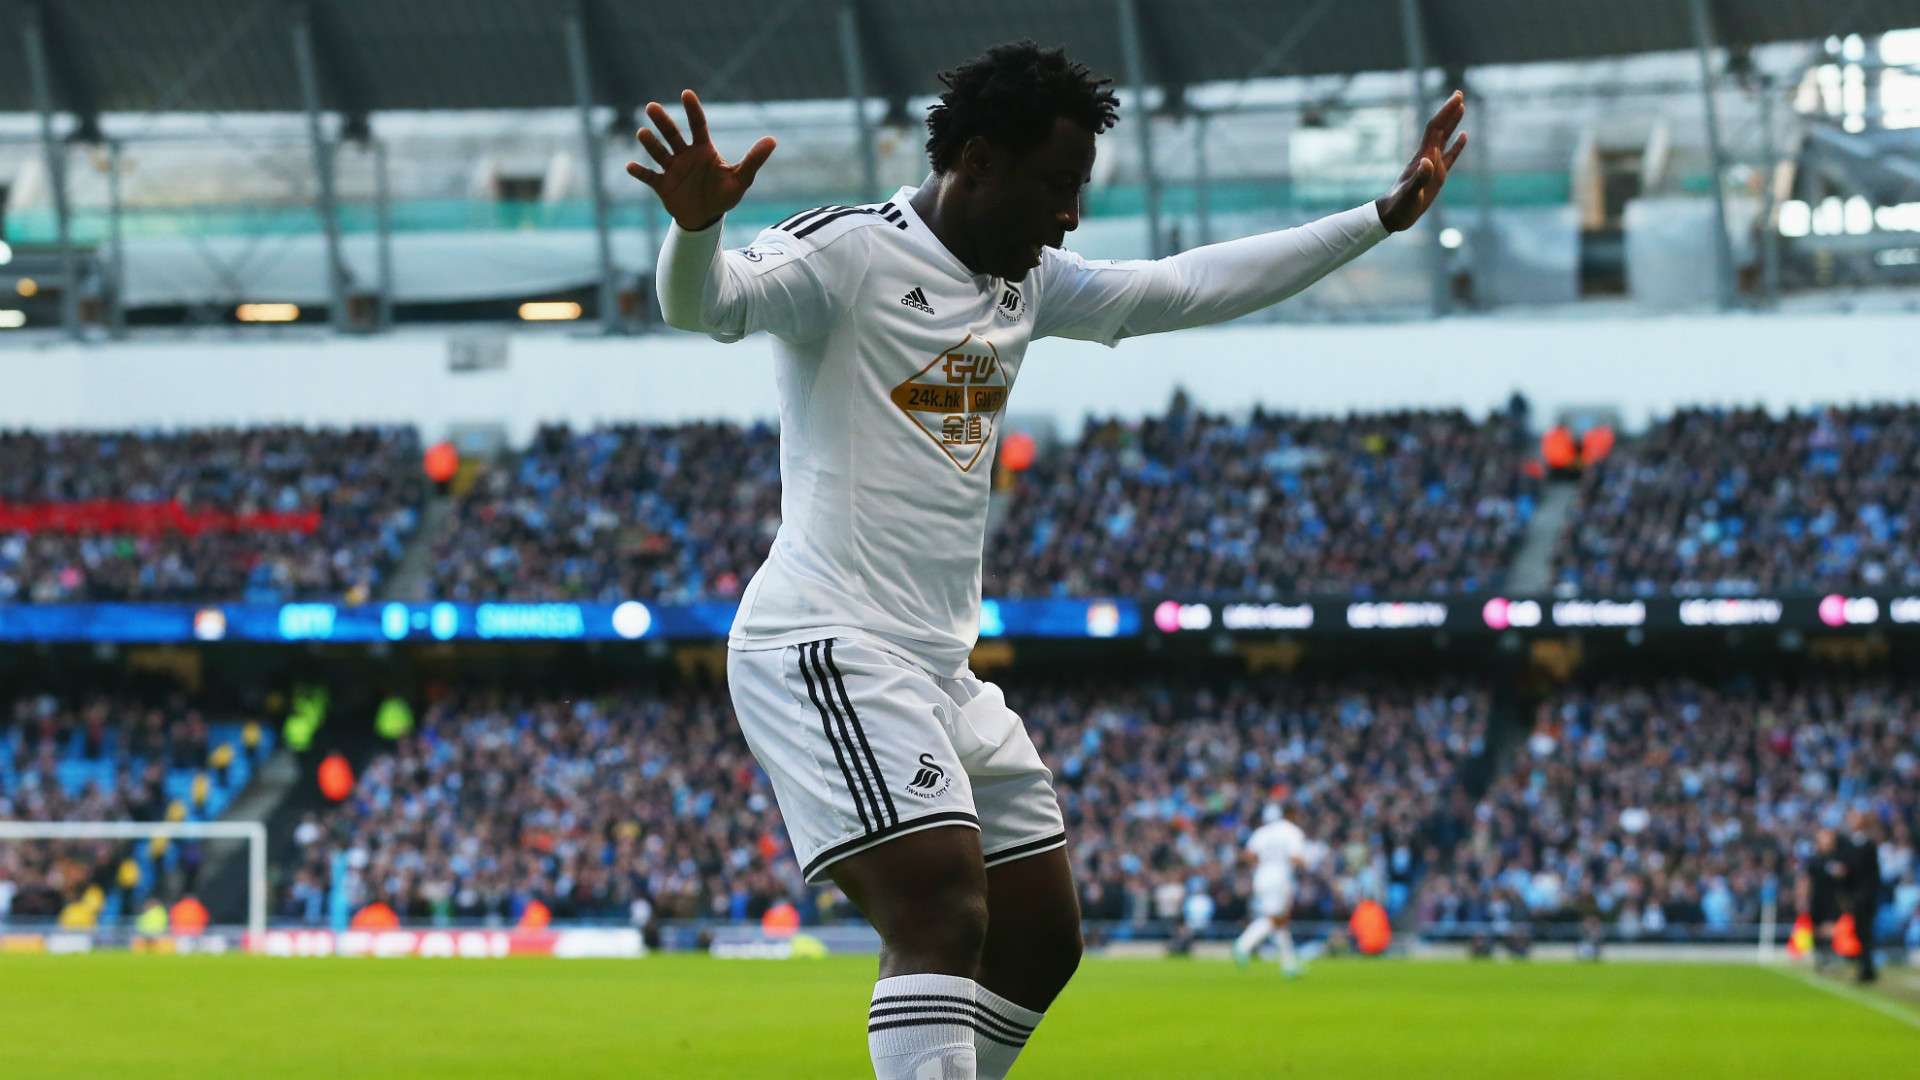 Wilfried Bony at Newport County: The incredible rise and fall of Africa's crown jewel